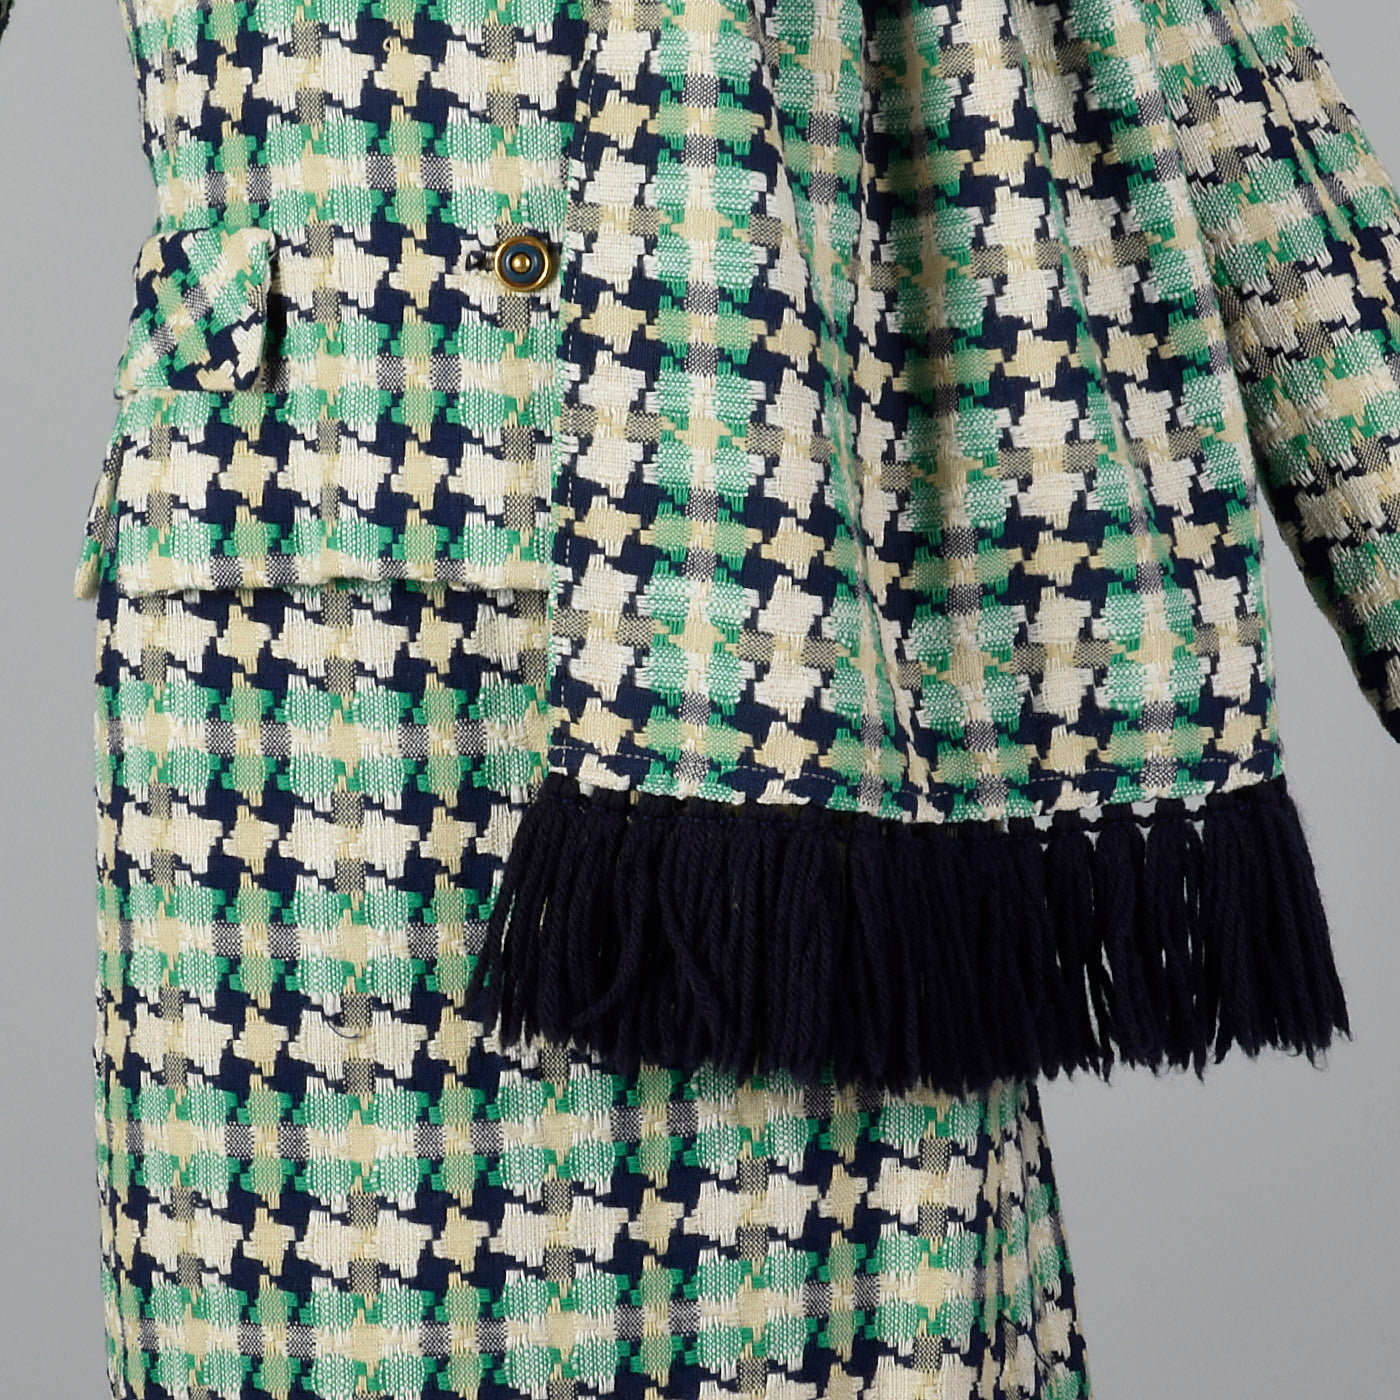 1960s I. Magnin Tweed Dress with Matching Jacket, Scarf, and Beret